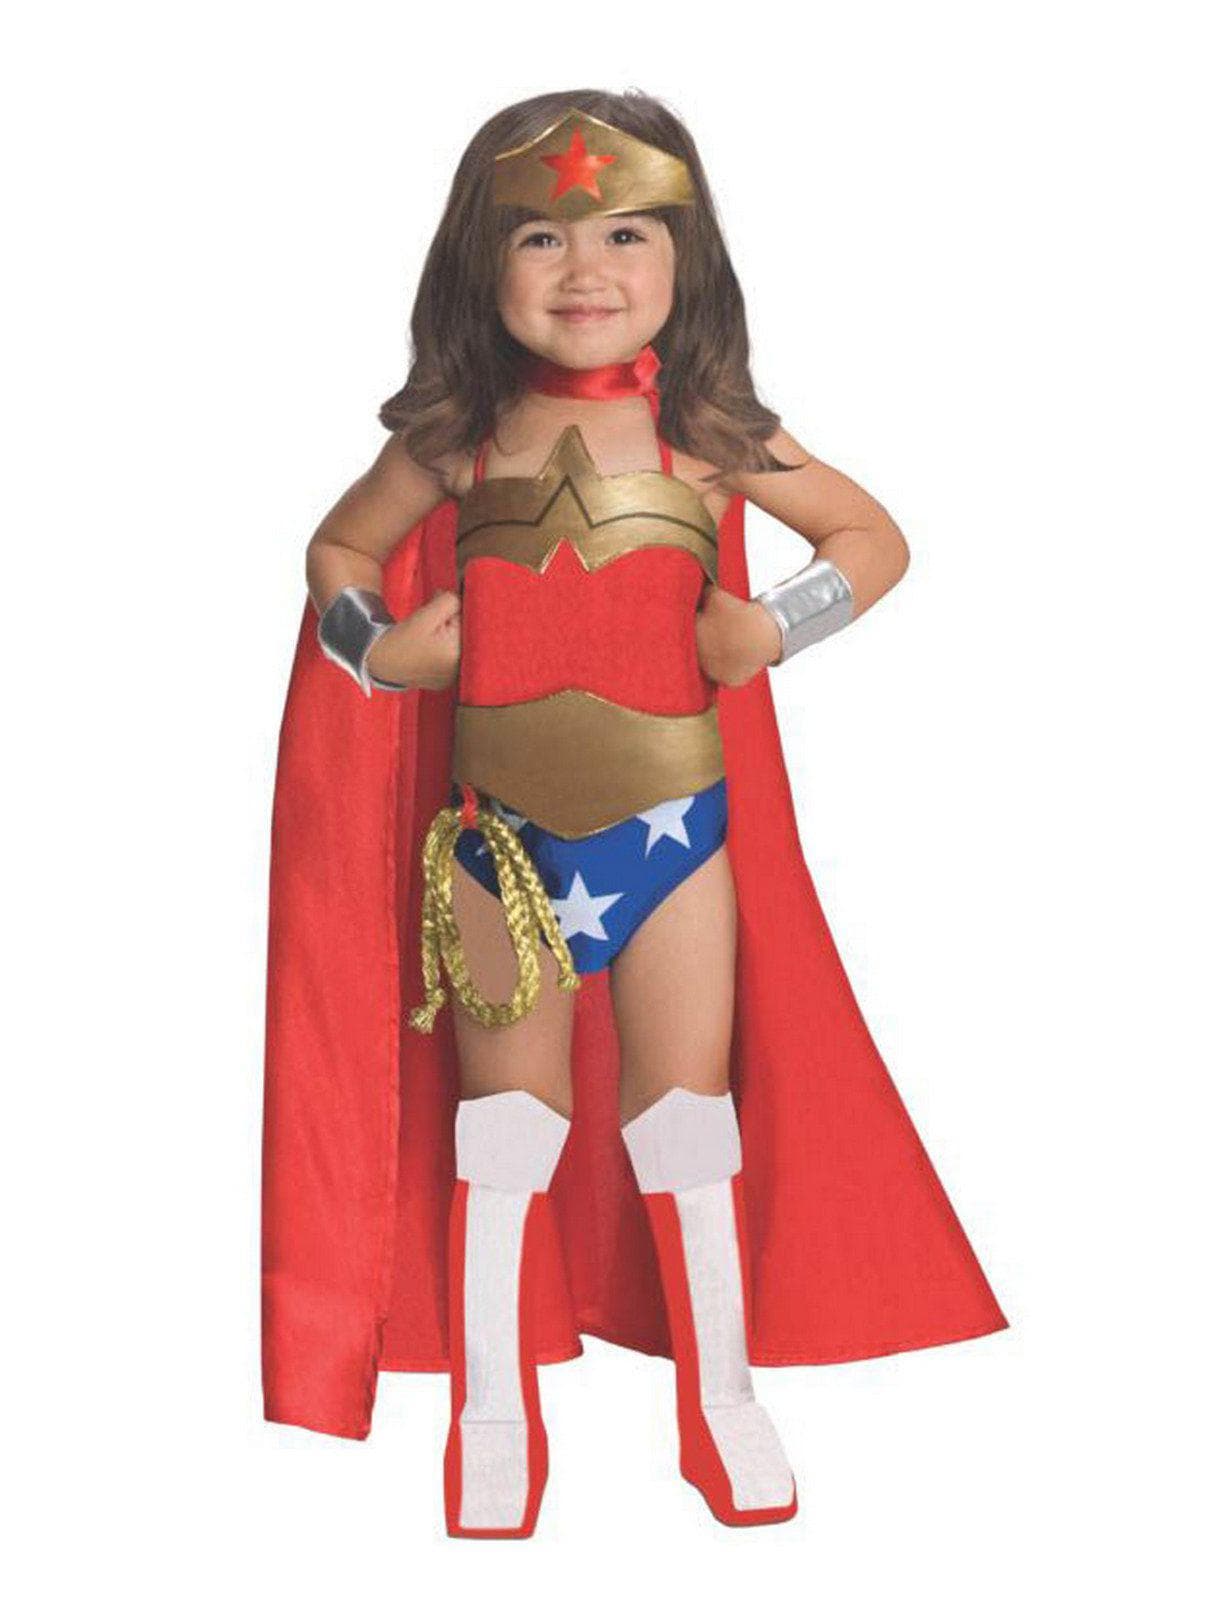 Baby/Toddler Justice League Wonder Woman Deluxe Costume - costumes.com